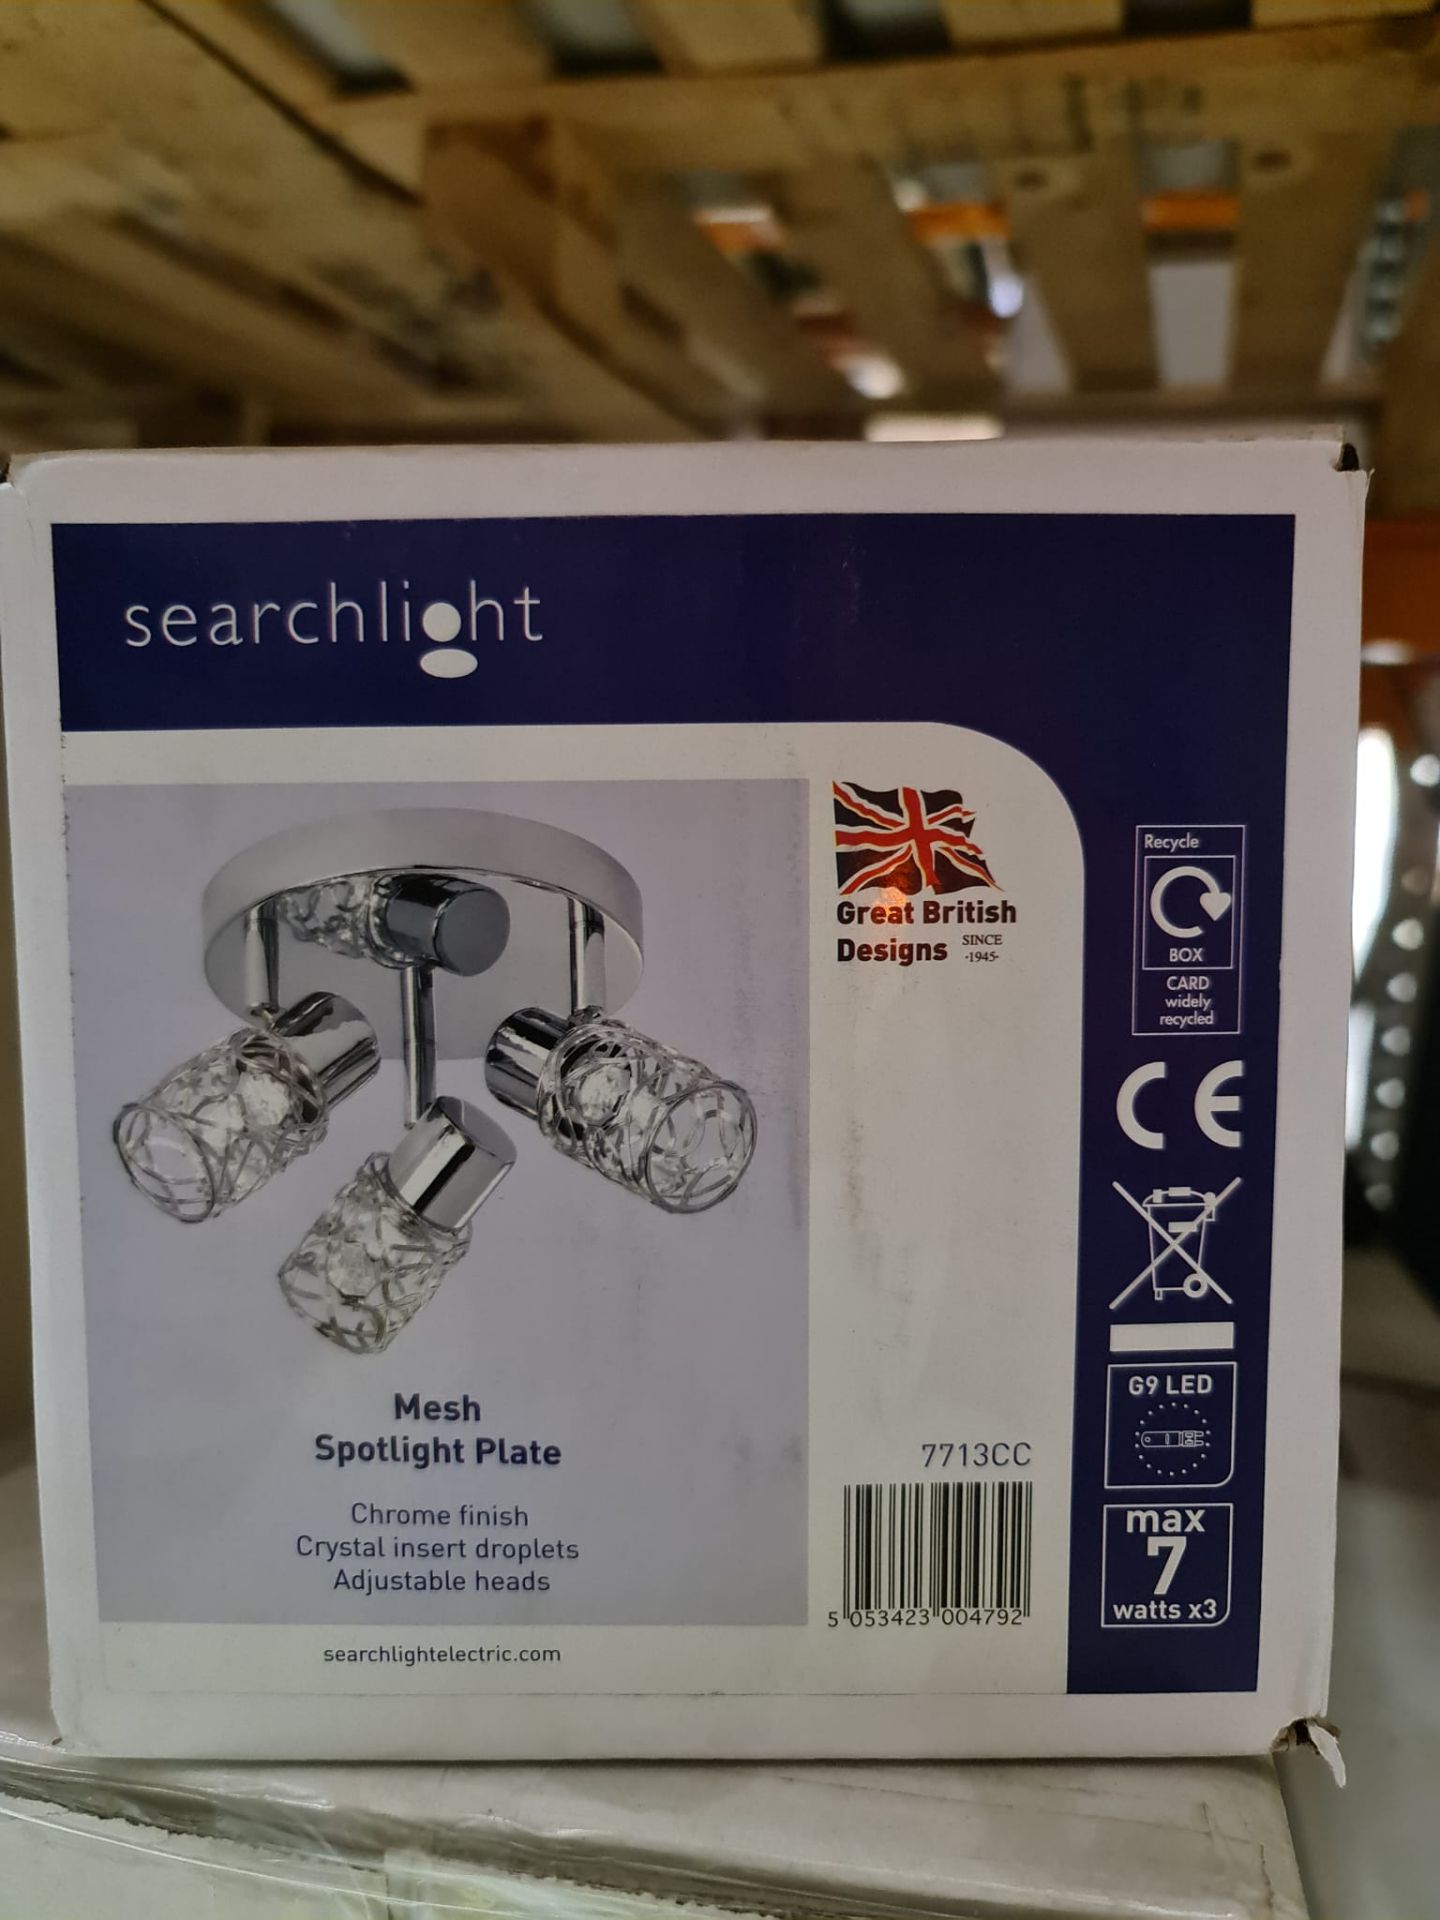 3 LIGHT CEILING SPOTLIGHT IN CHROME AND CLEAR GLASS. 32CM WIDE. 33W. - Image 2 of 2